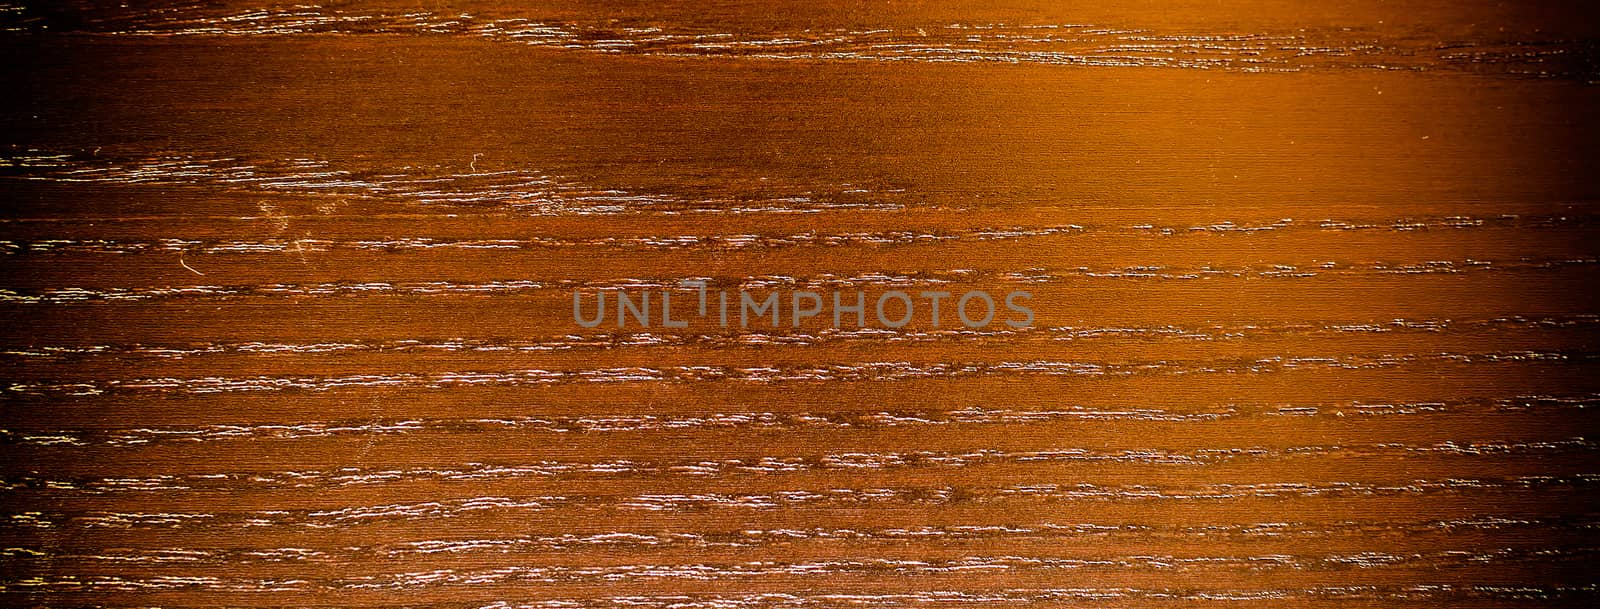 Wooden brown texture, used for background, photo with vignette effect